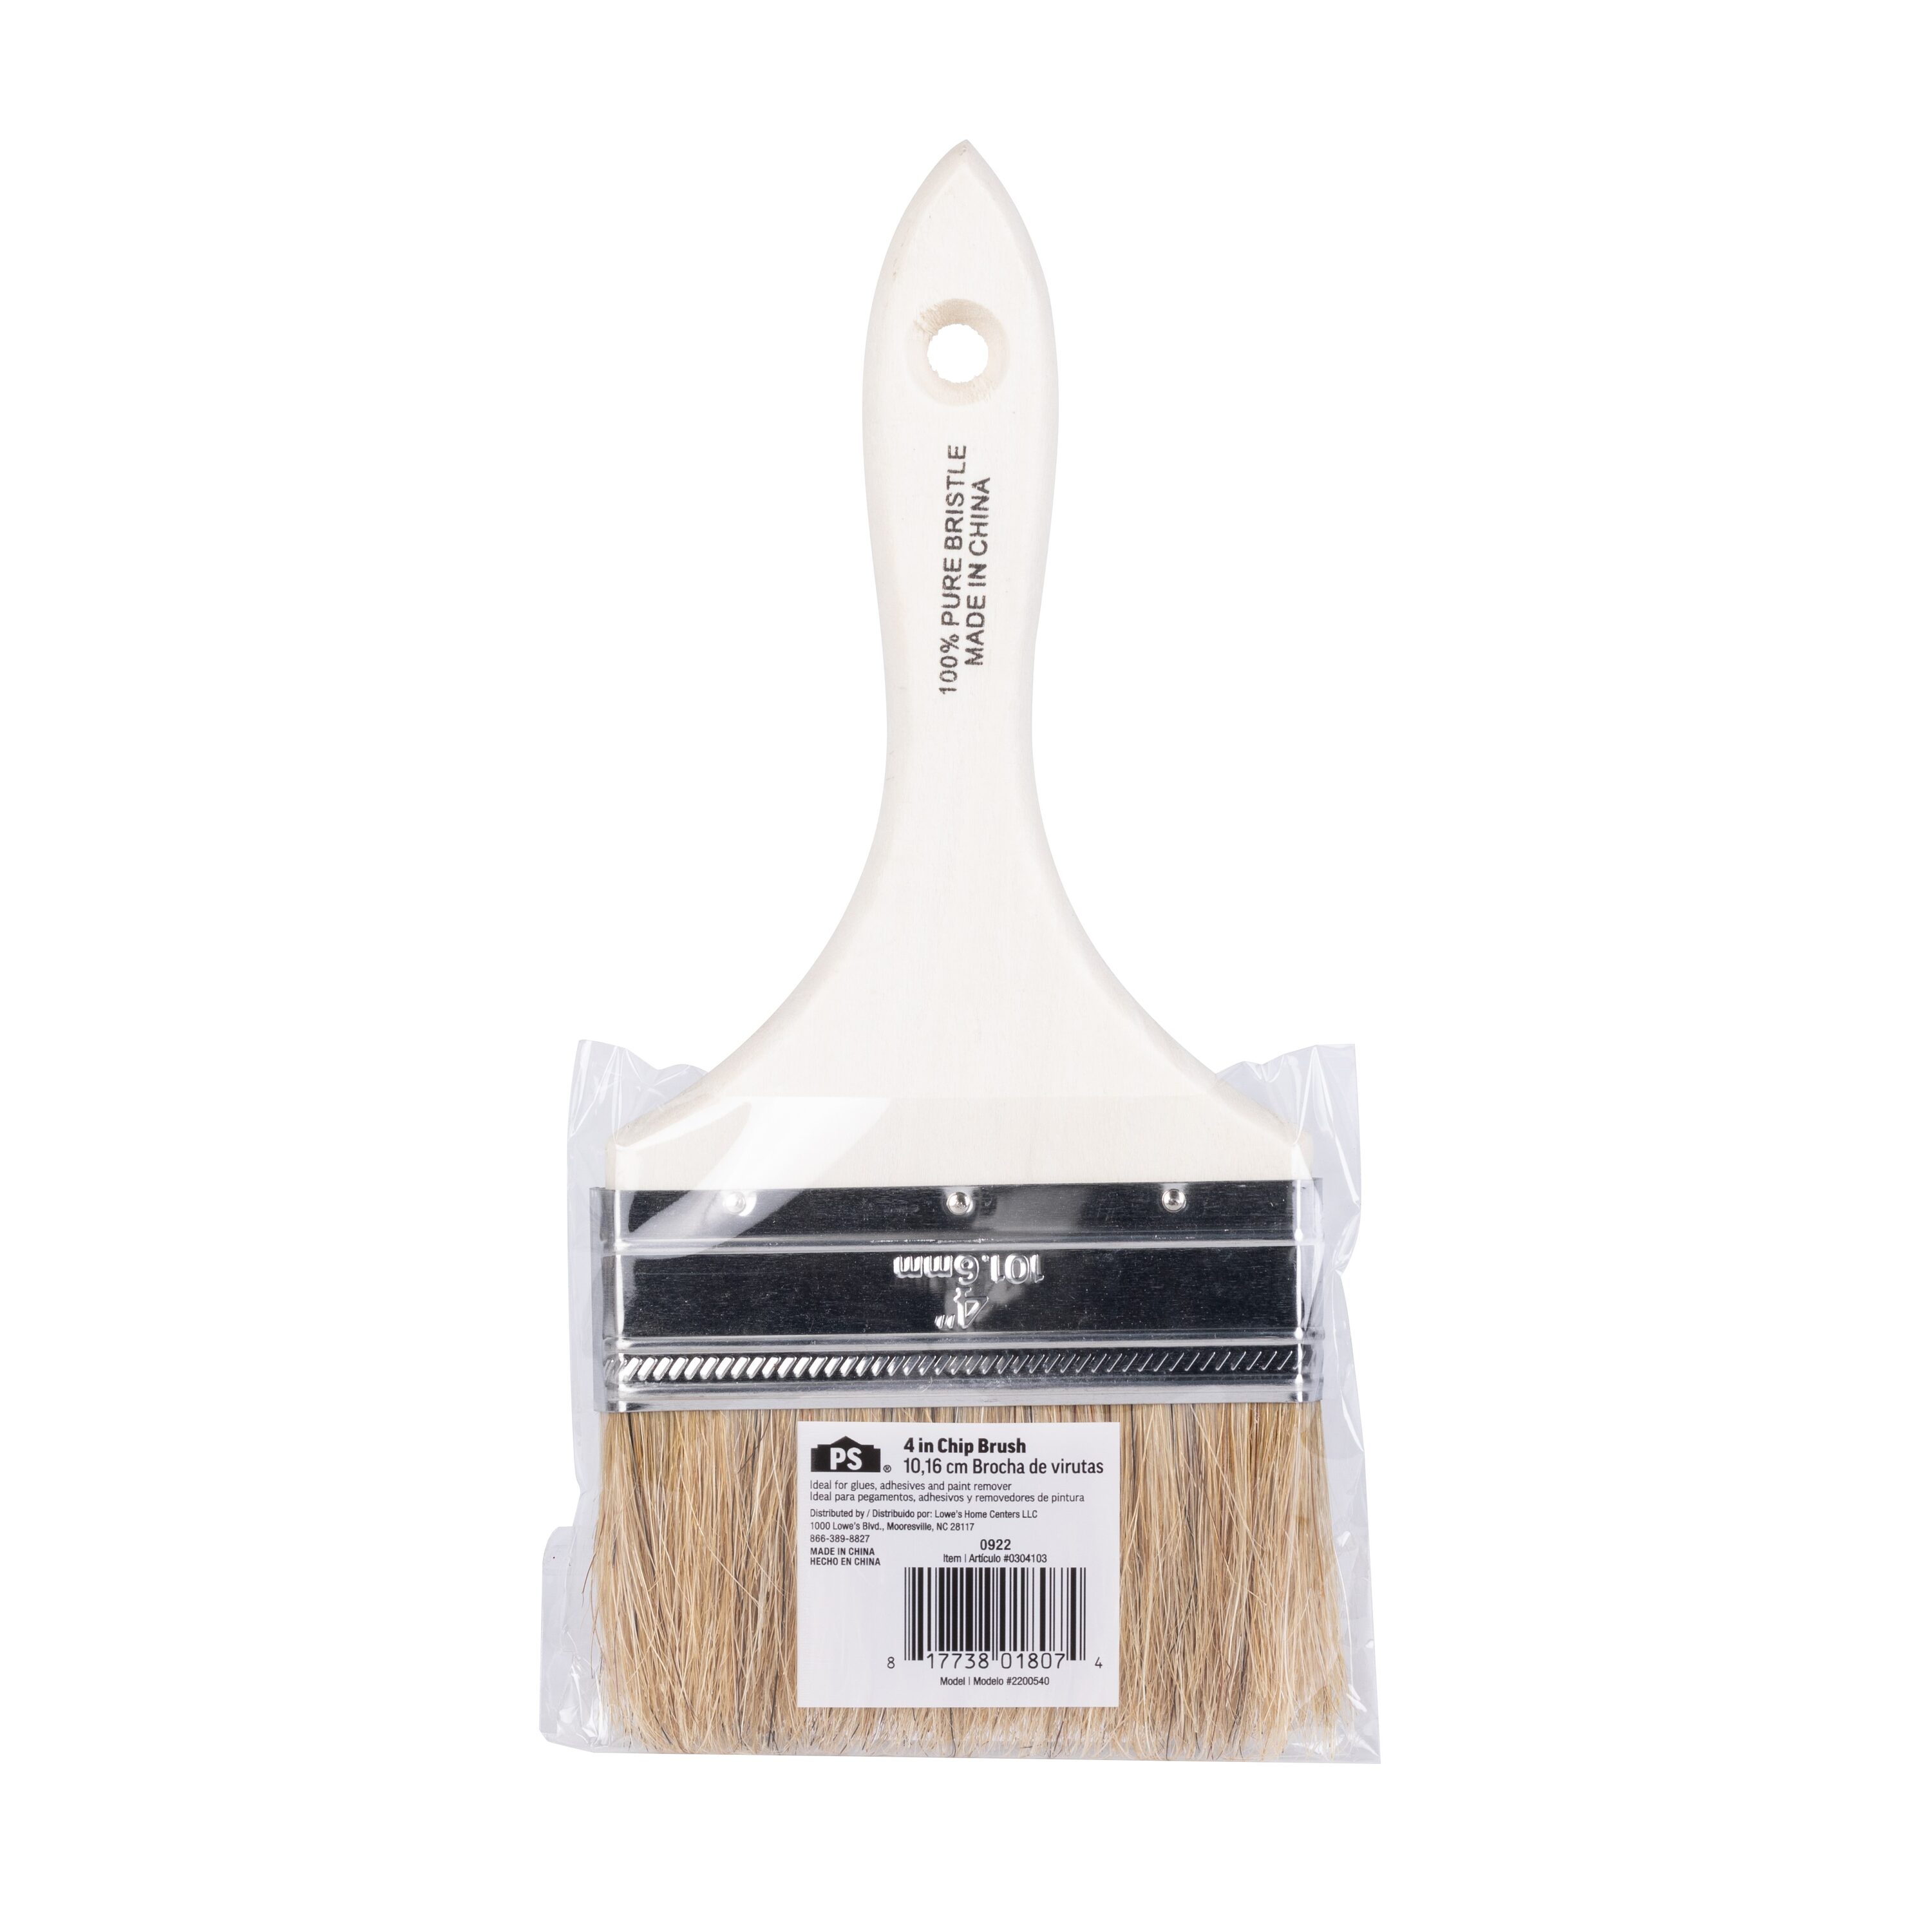 Multi Sizes Wooden Handle Wide Paint Brush - China Bristle Paint Brush,  Wooden Brushes